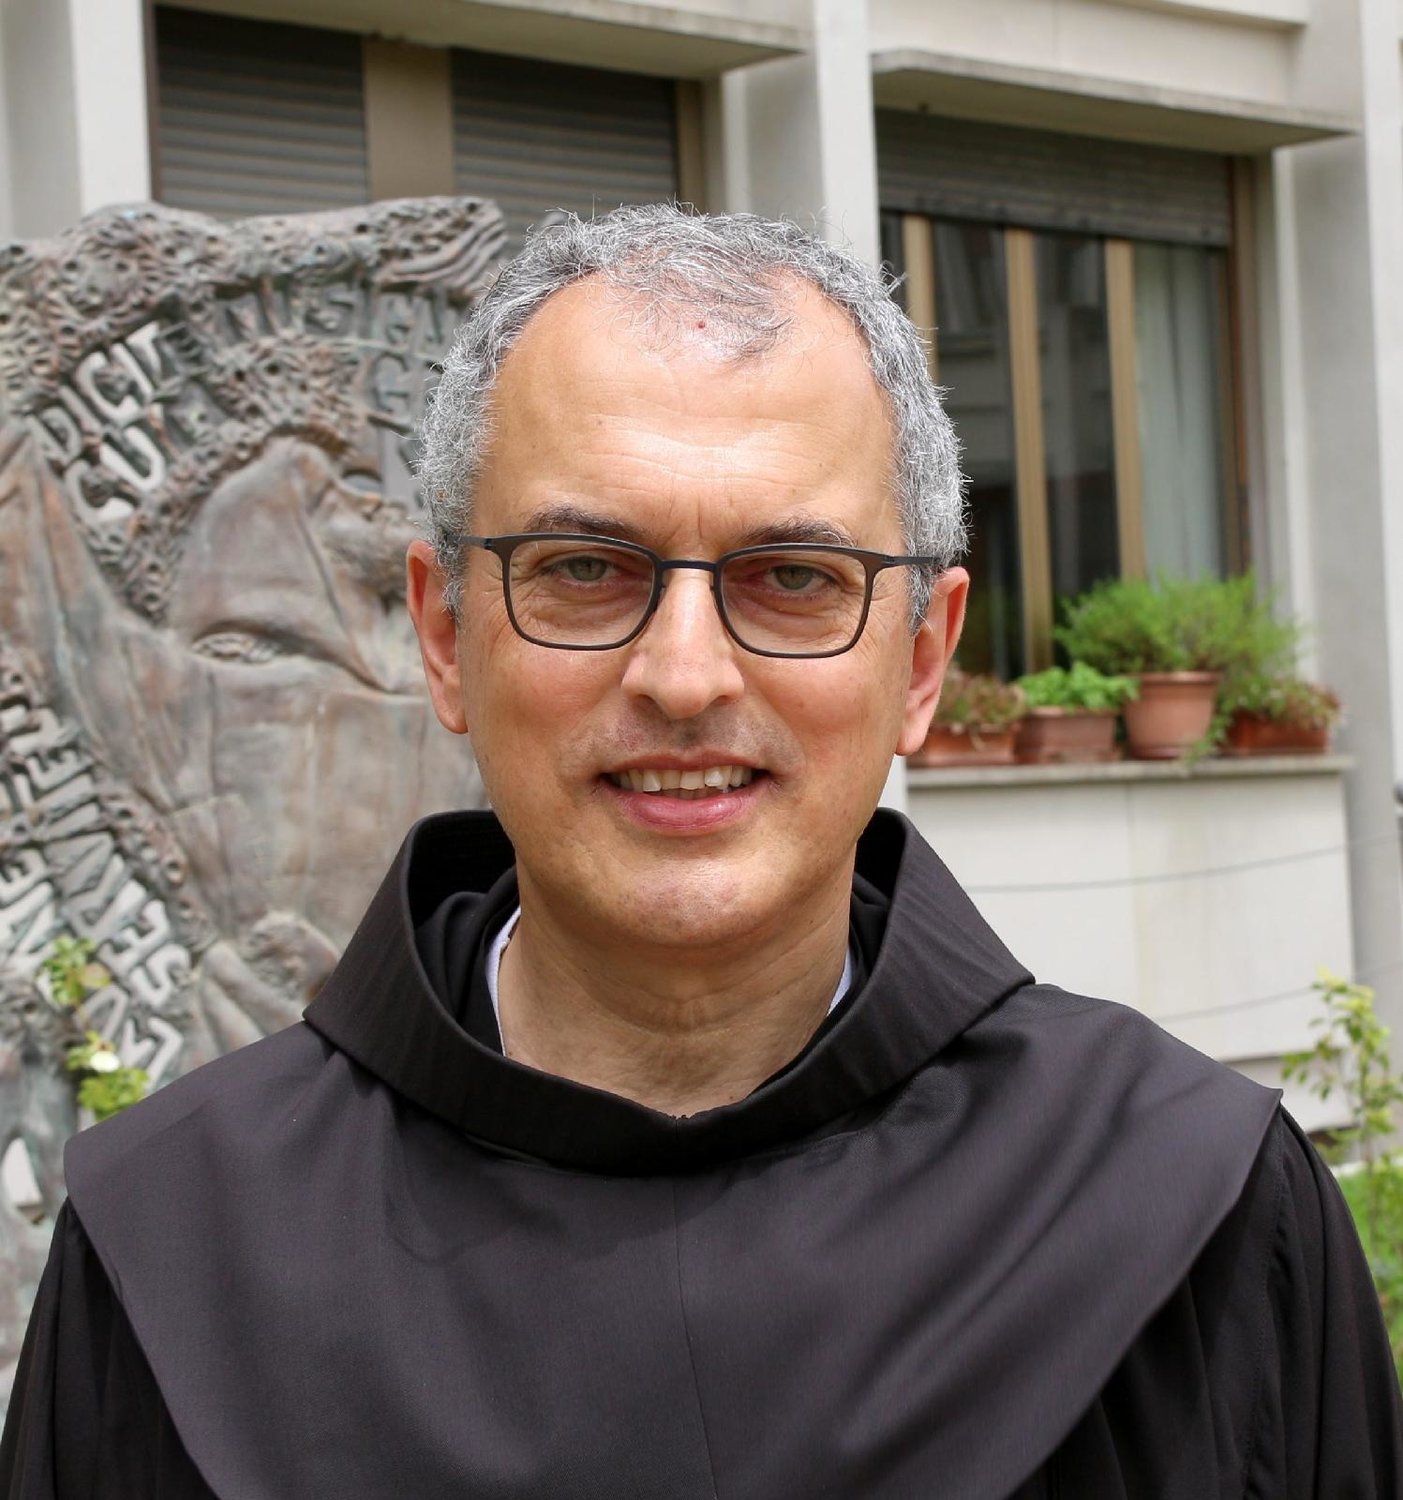 The Order of Friars Minor, commonly known as the Franciscans, elected Father Massimo Fusarelli, 58, to be minister general of the order. He is pictured in an undated photo.